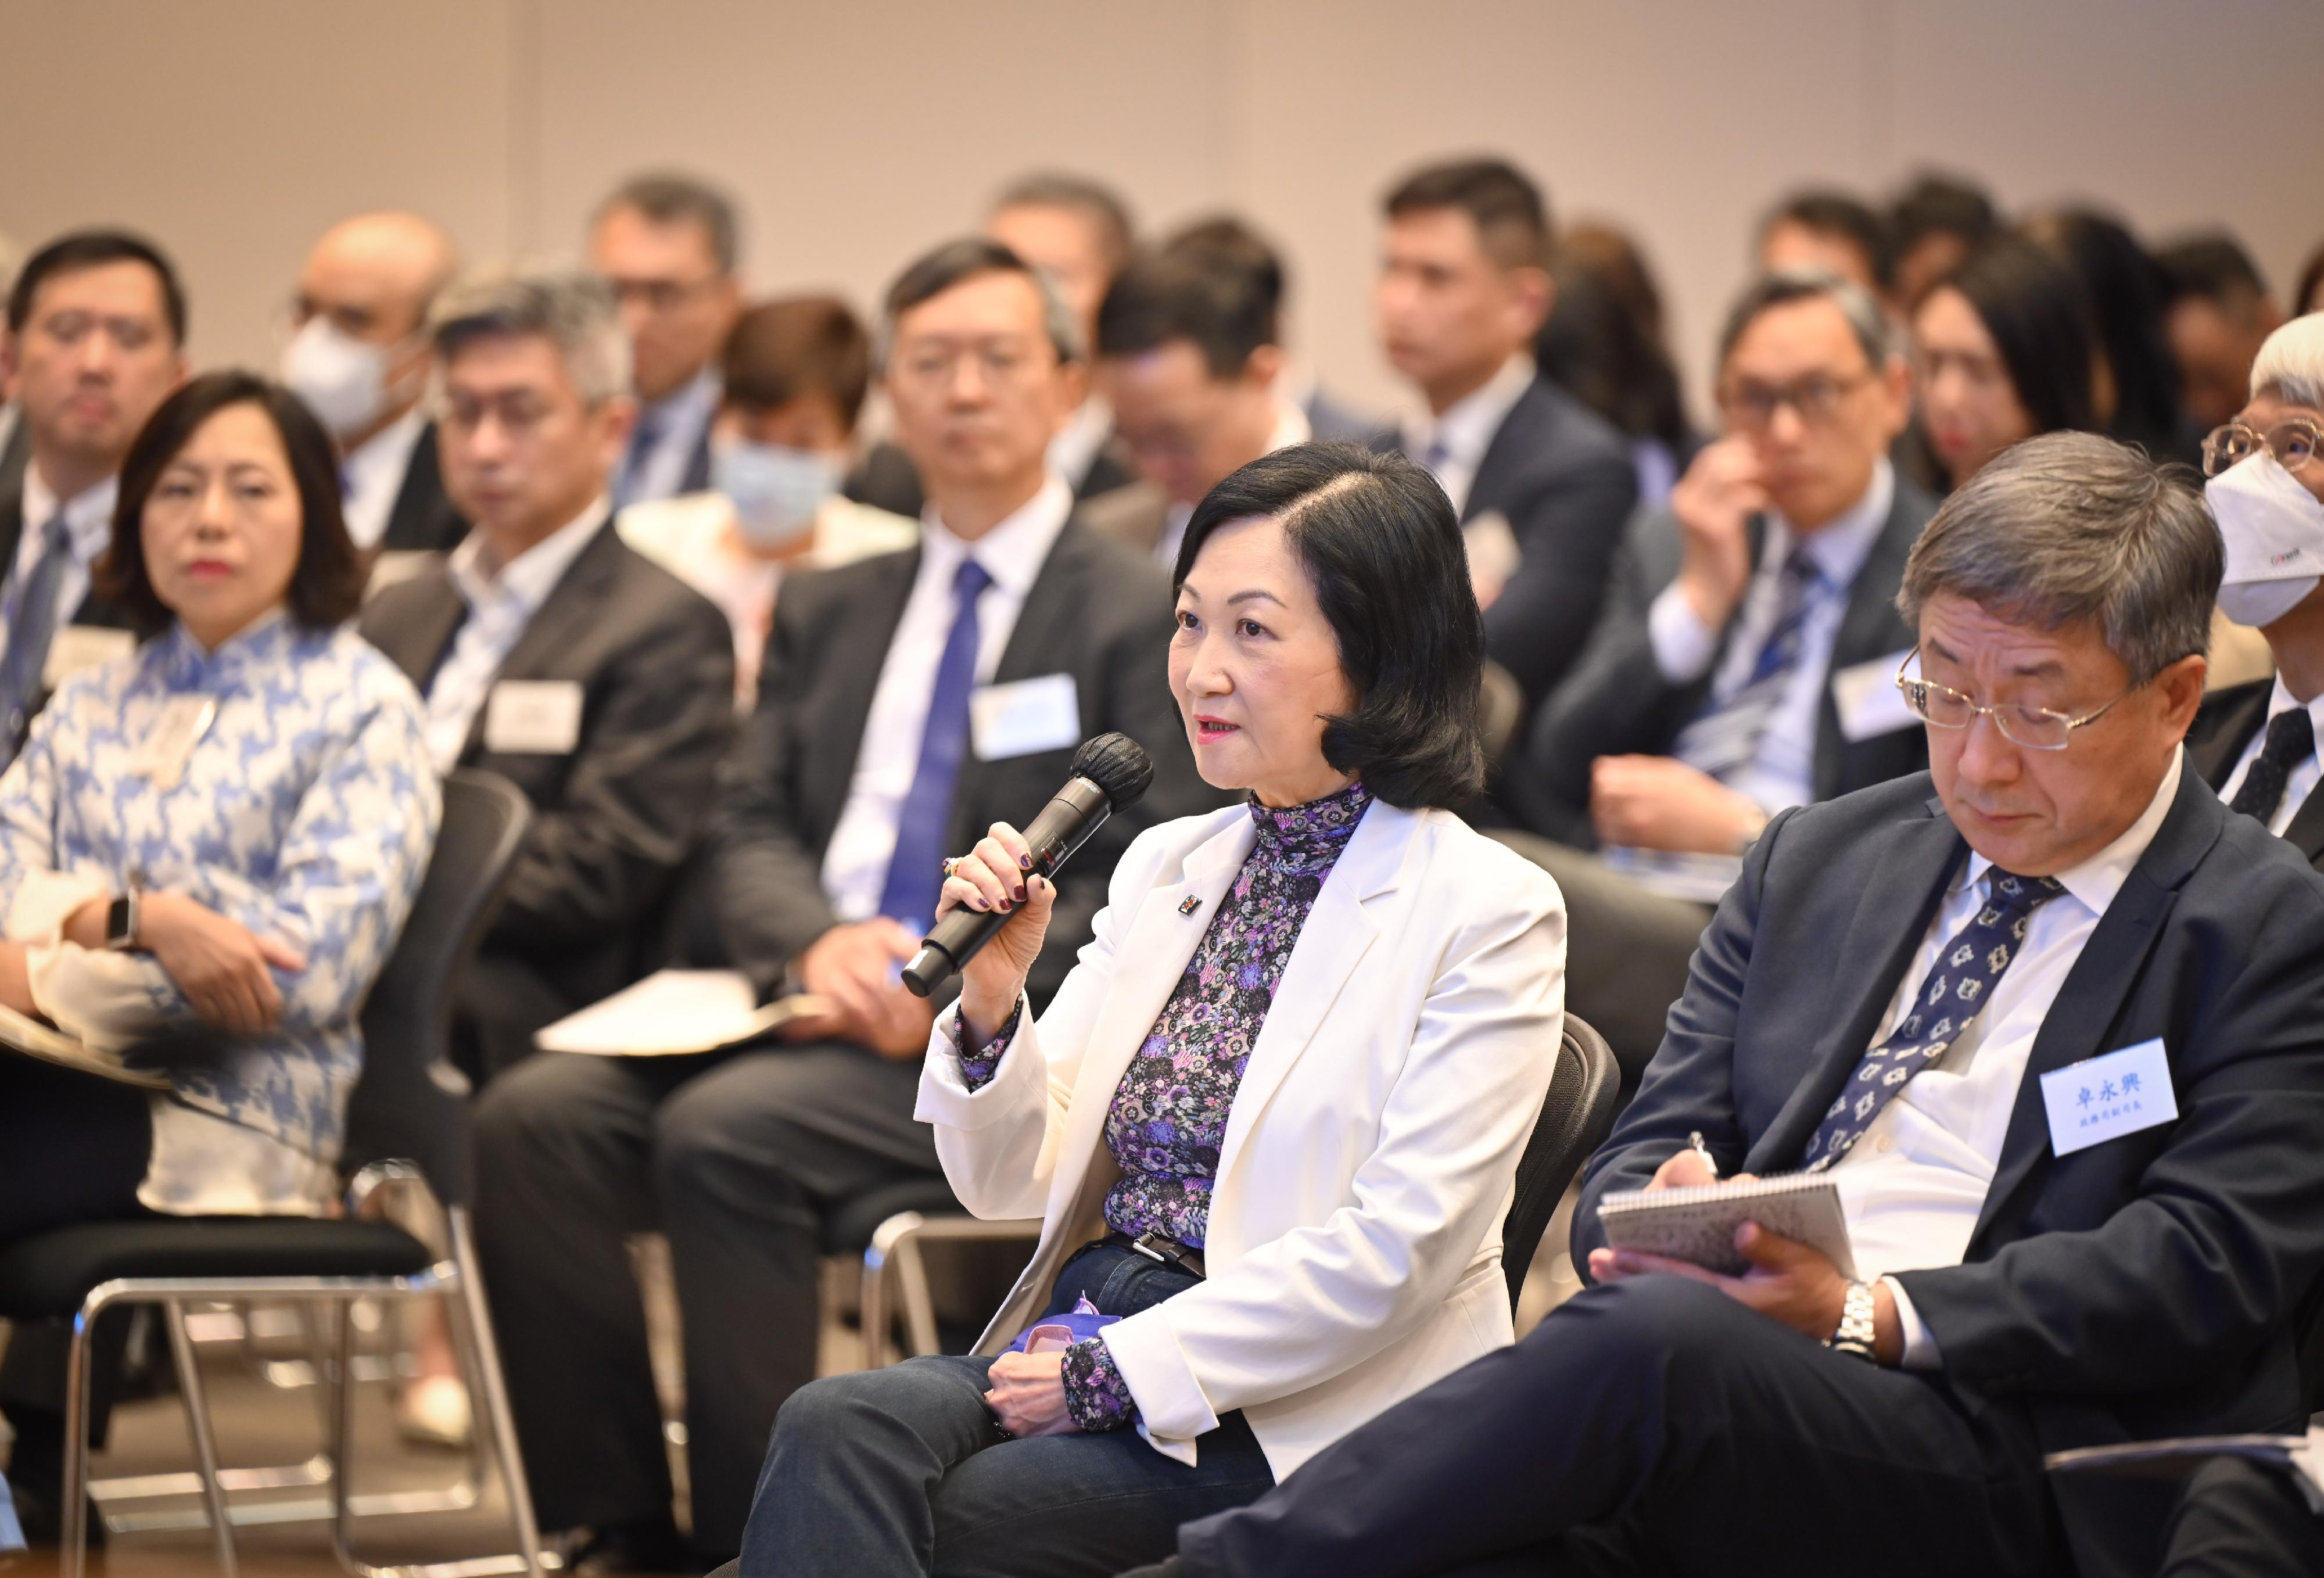 The Hong Kong Special Administrative Region Government today (March 24) held a sharing session on the spirit of "two sessions" at the Central Government Offices. Photo shows the Convenor of the Non-official Members of the Executive Council, Mrs Regina Ip, sharing her views.